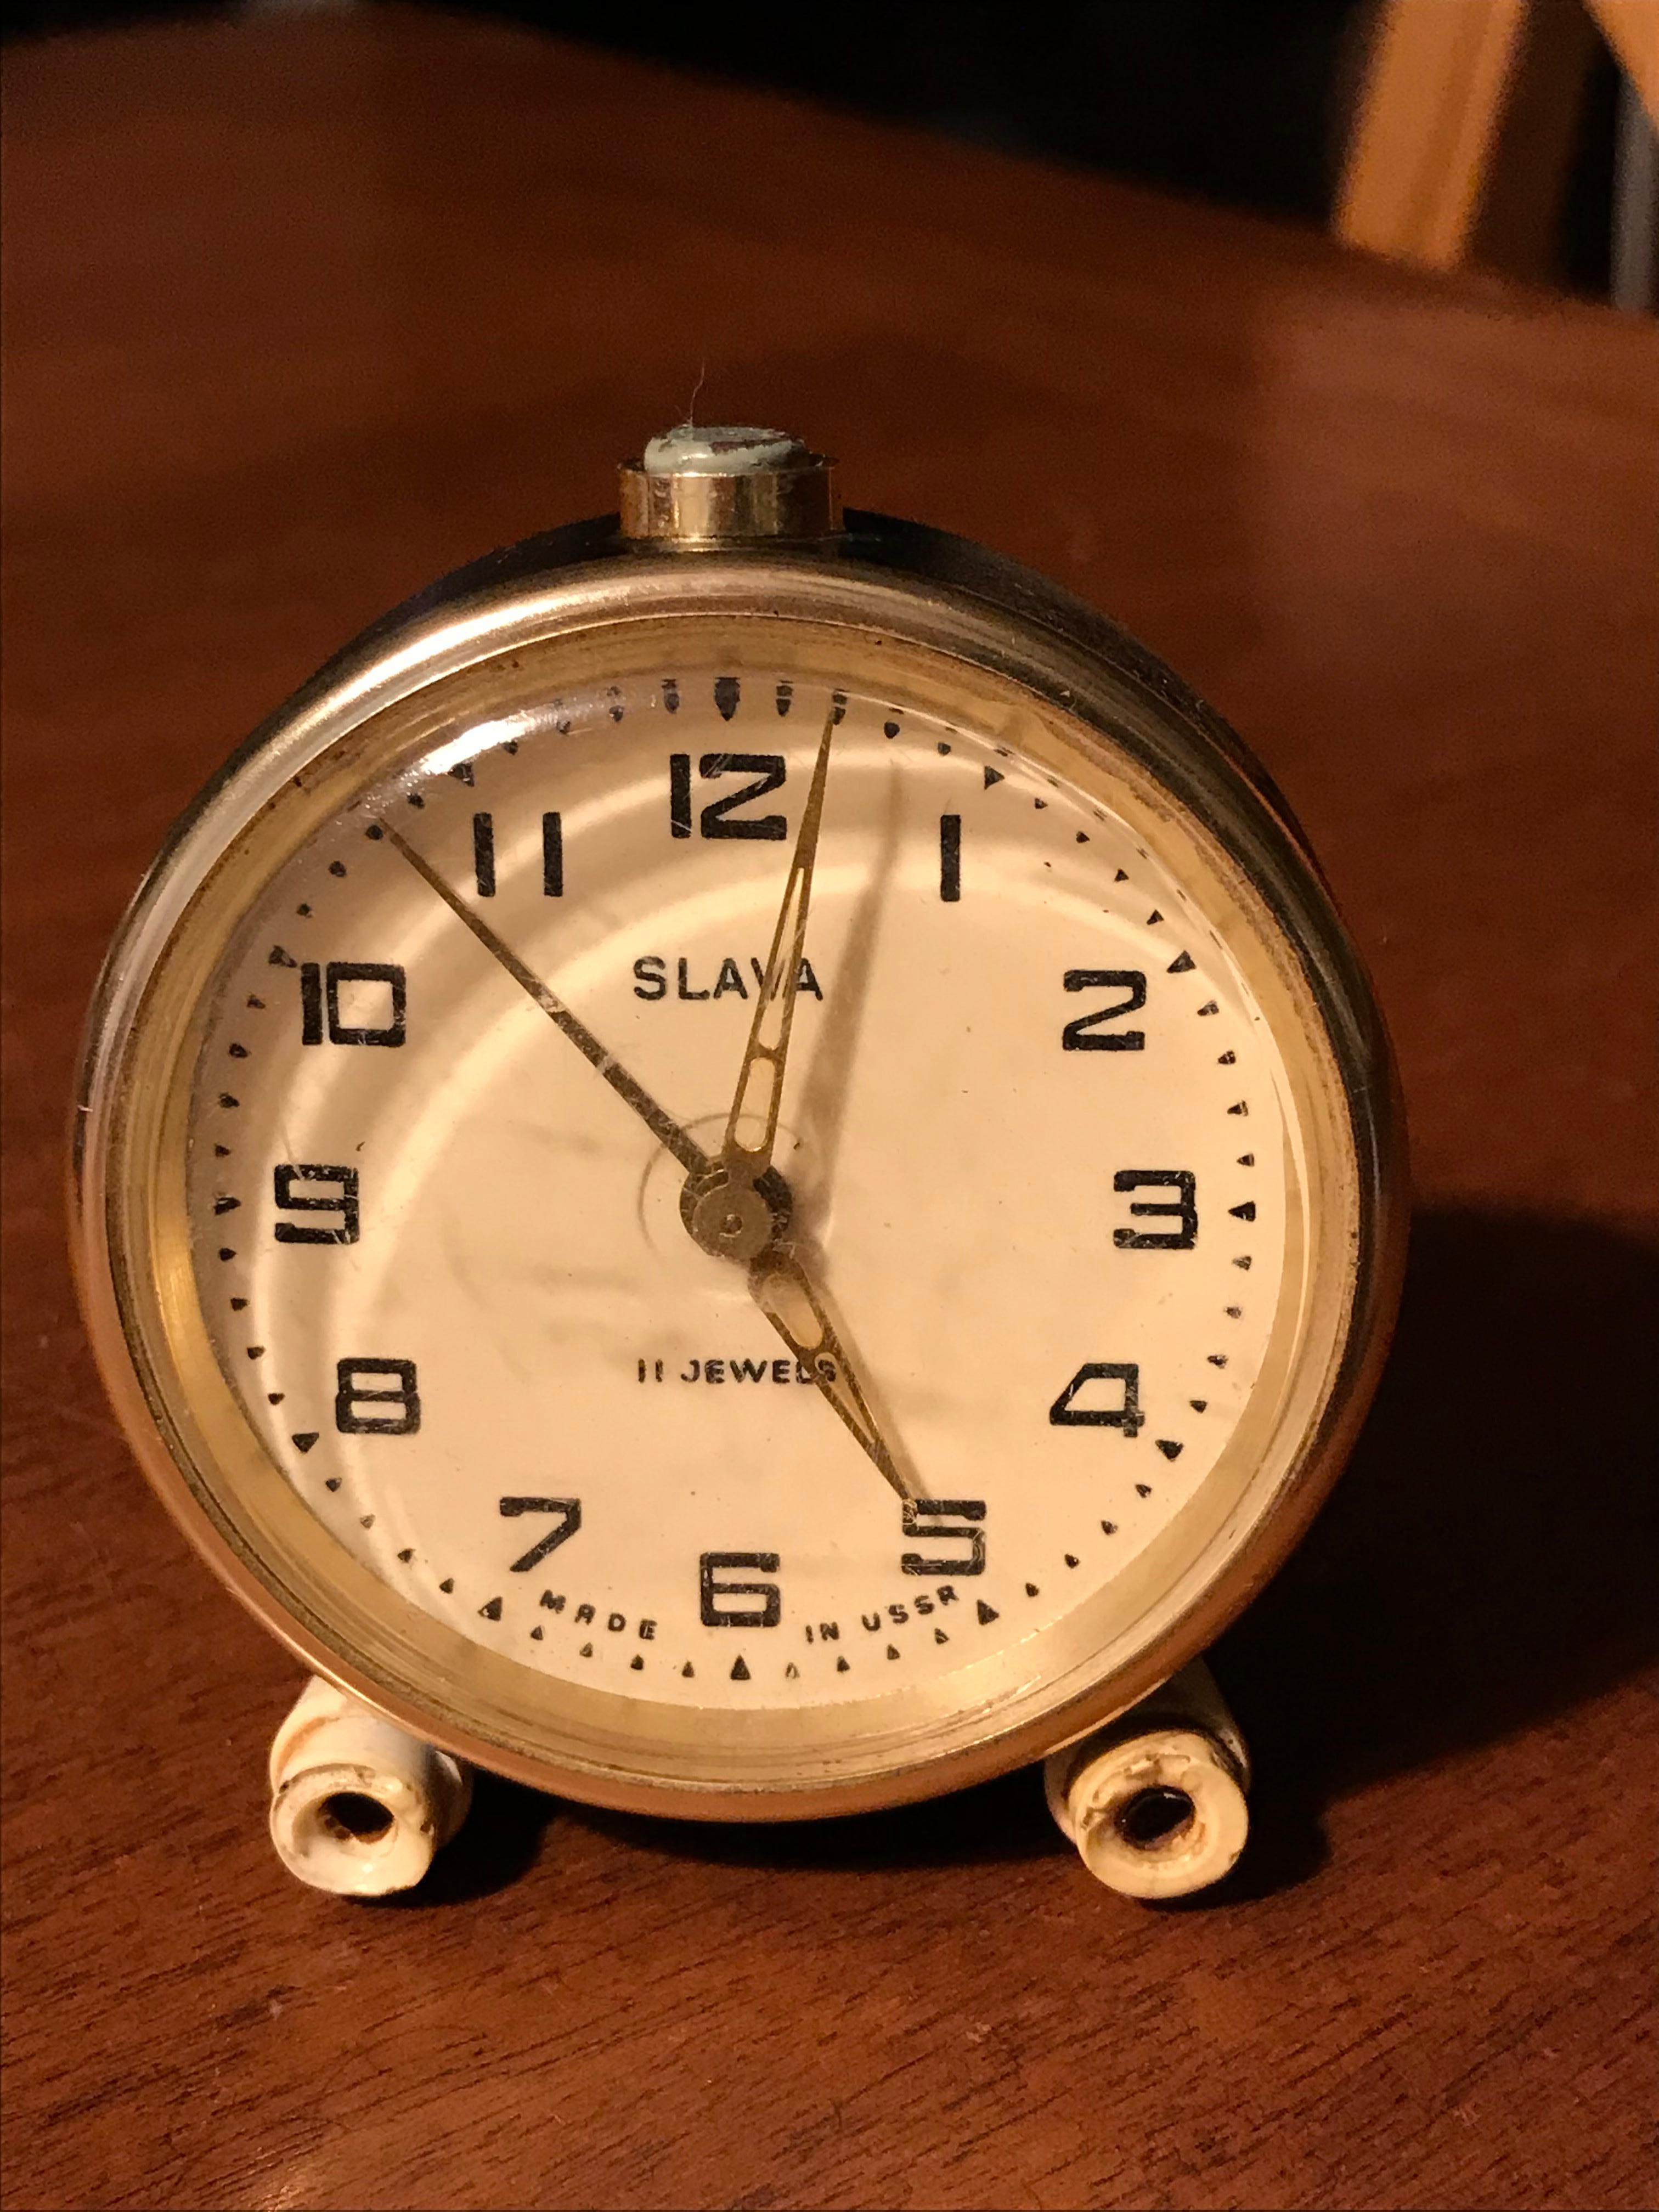 Vintage alarm desk table clock Slava 1980s, from Russia / Soviet Union / USSR
Measures: Length (Depth) 1.97 in
Width 2.56 in
Height 3.15 in.